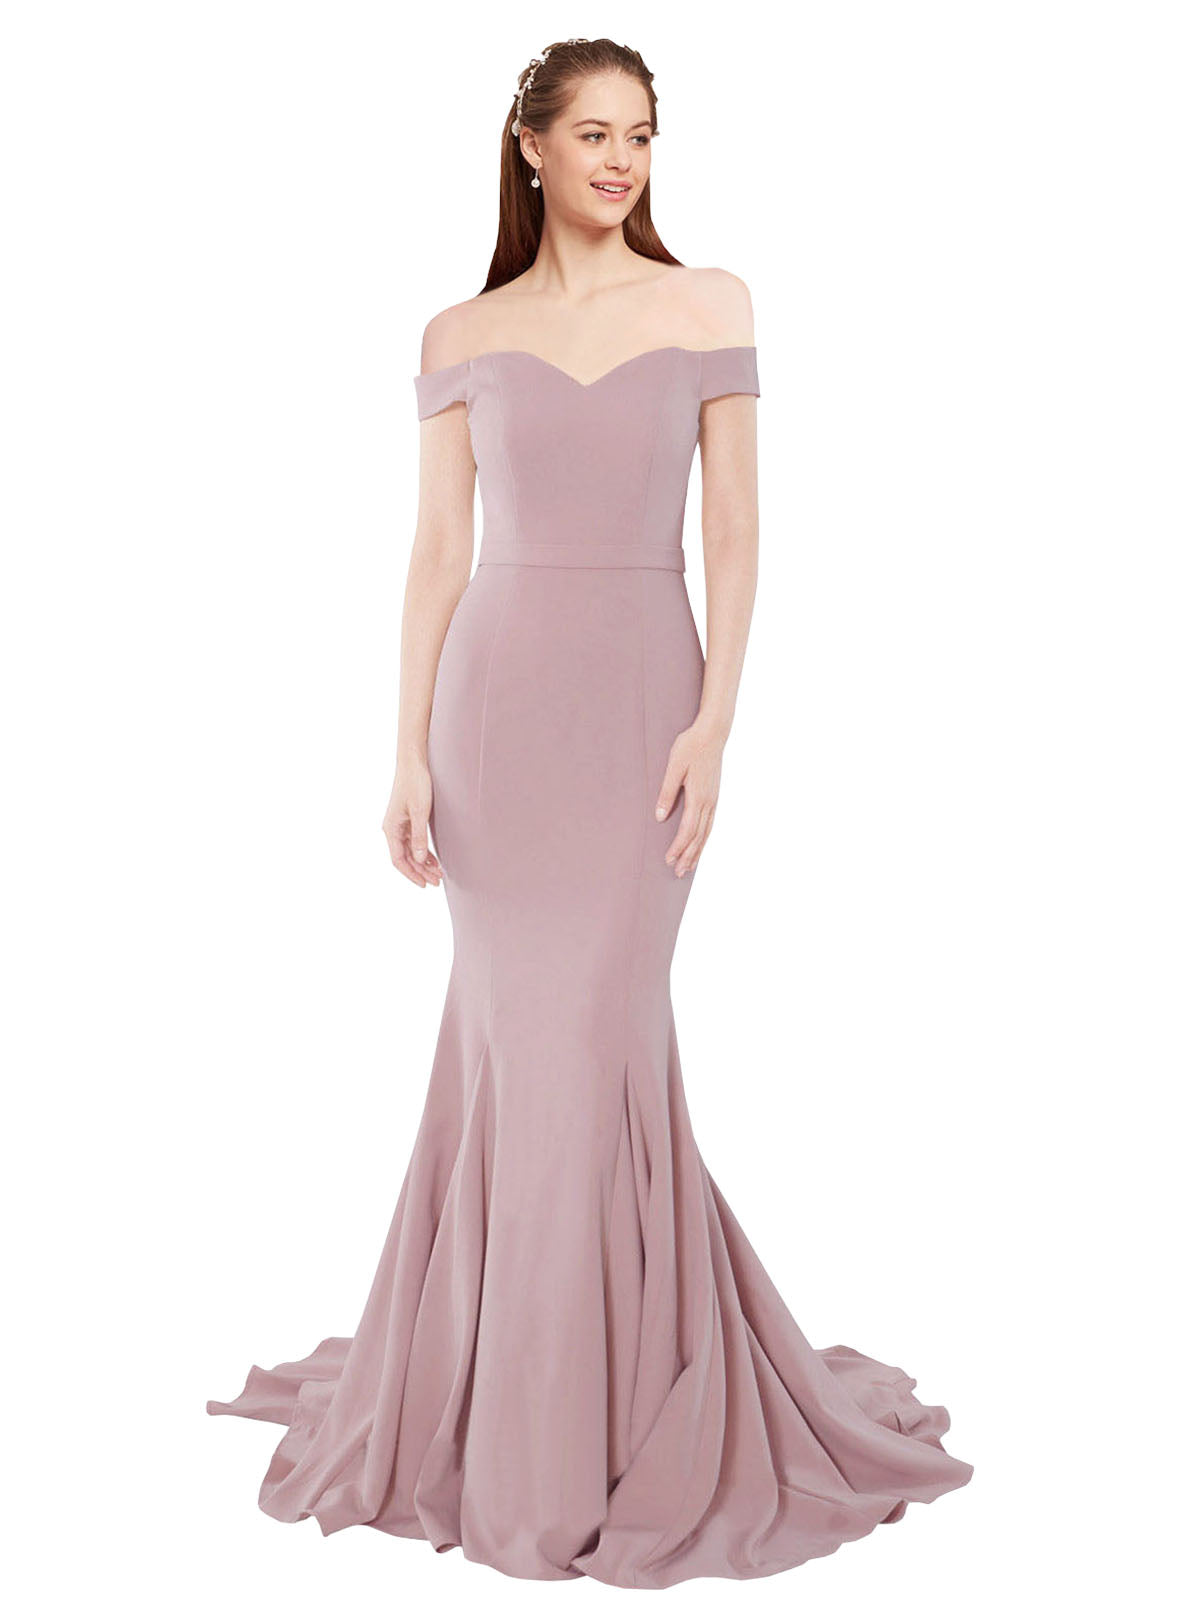 RightBrides Jannet Long Mermaid Off the Shoulder Sweetheart Sweep Train Floor Length Sleeveless Dusty Pink Stretch Crepe Bridesmaid Dress